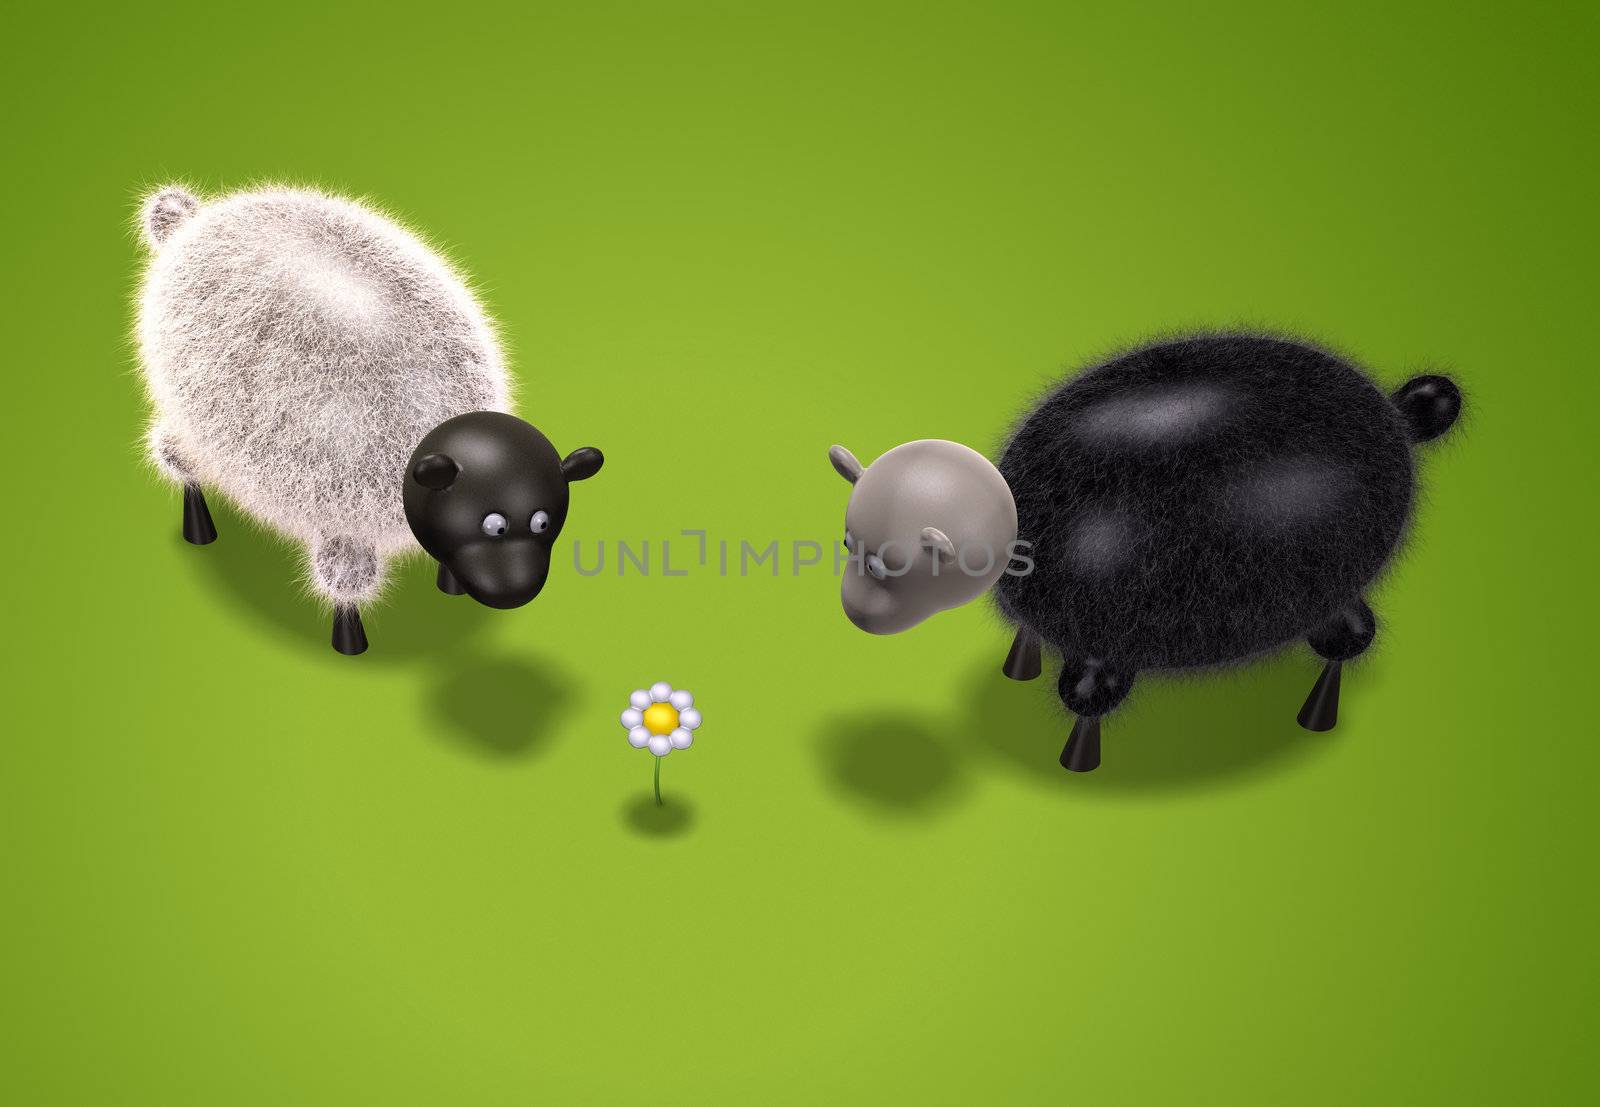 An image of two nice rendered sheep